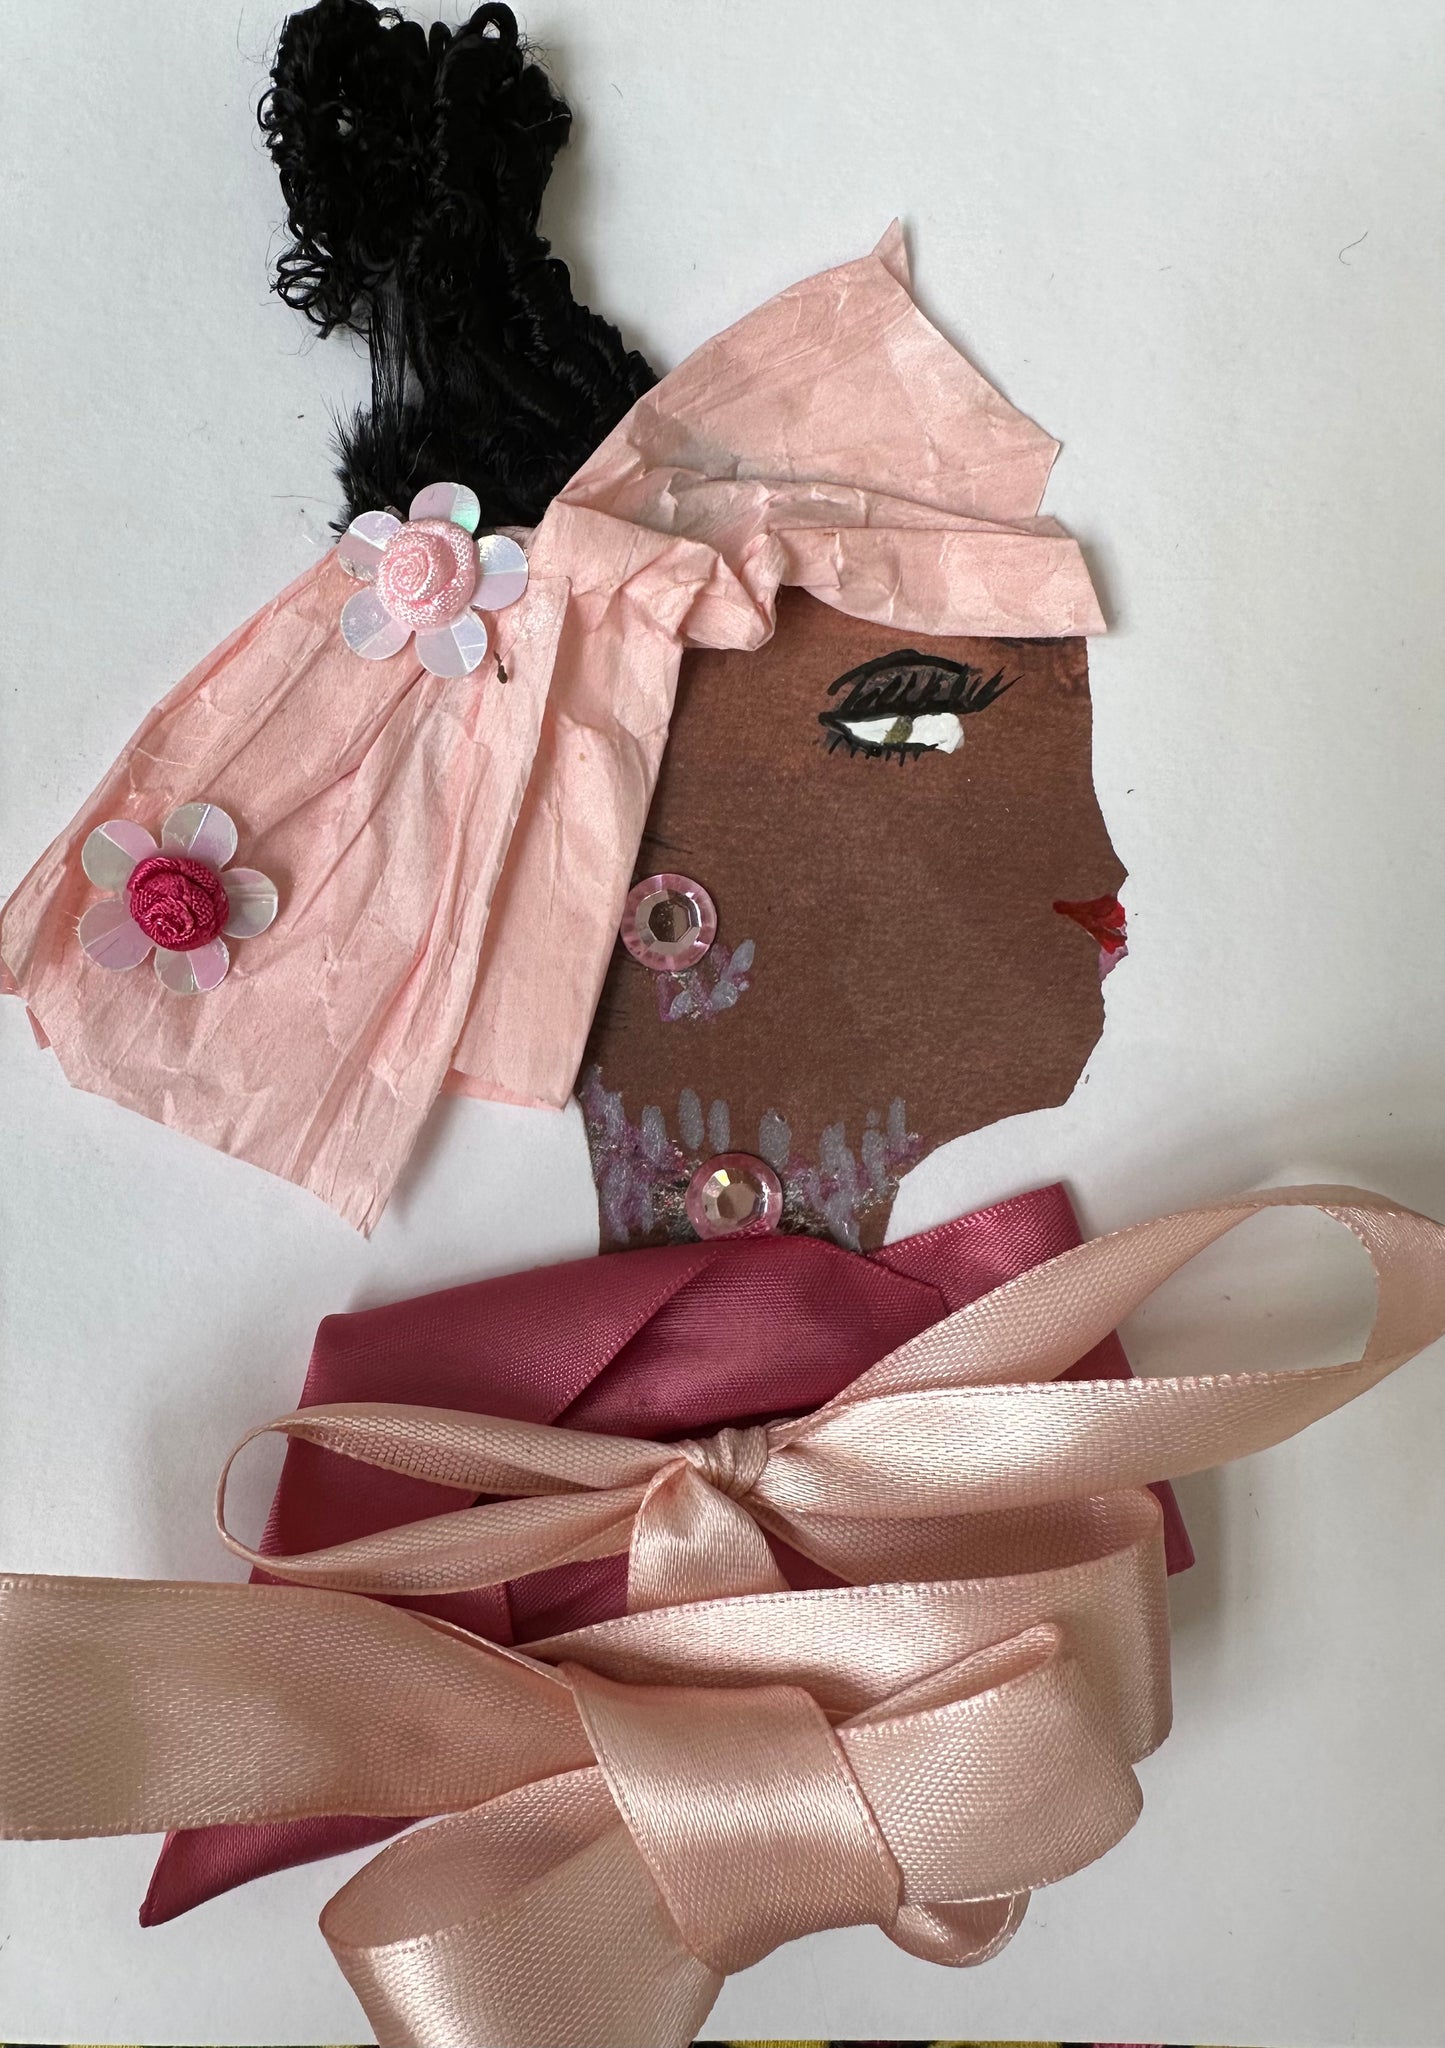 I designed this handmade card of a black woman dressed in a blouse that is composed of two light pink bows. Her hatinator is a light pink, bow-like shape with two flowers, and she has gemstones has jewellery. 